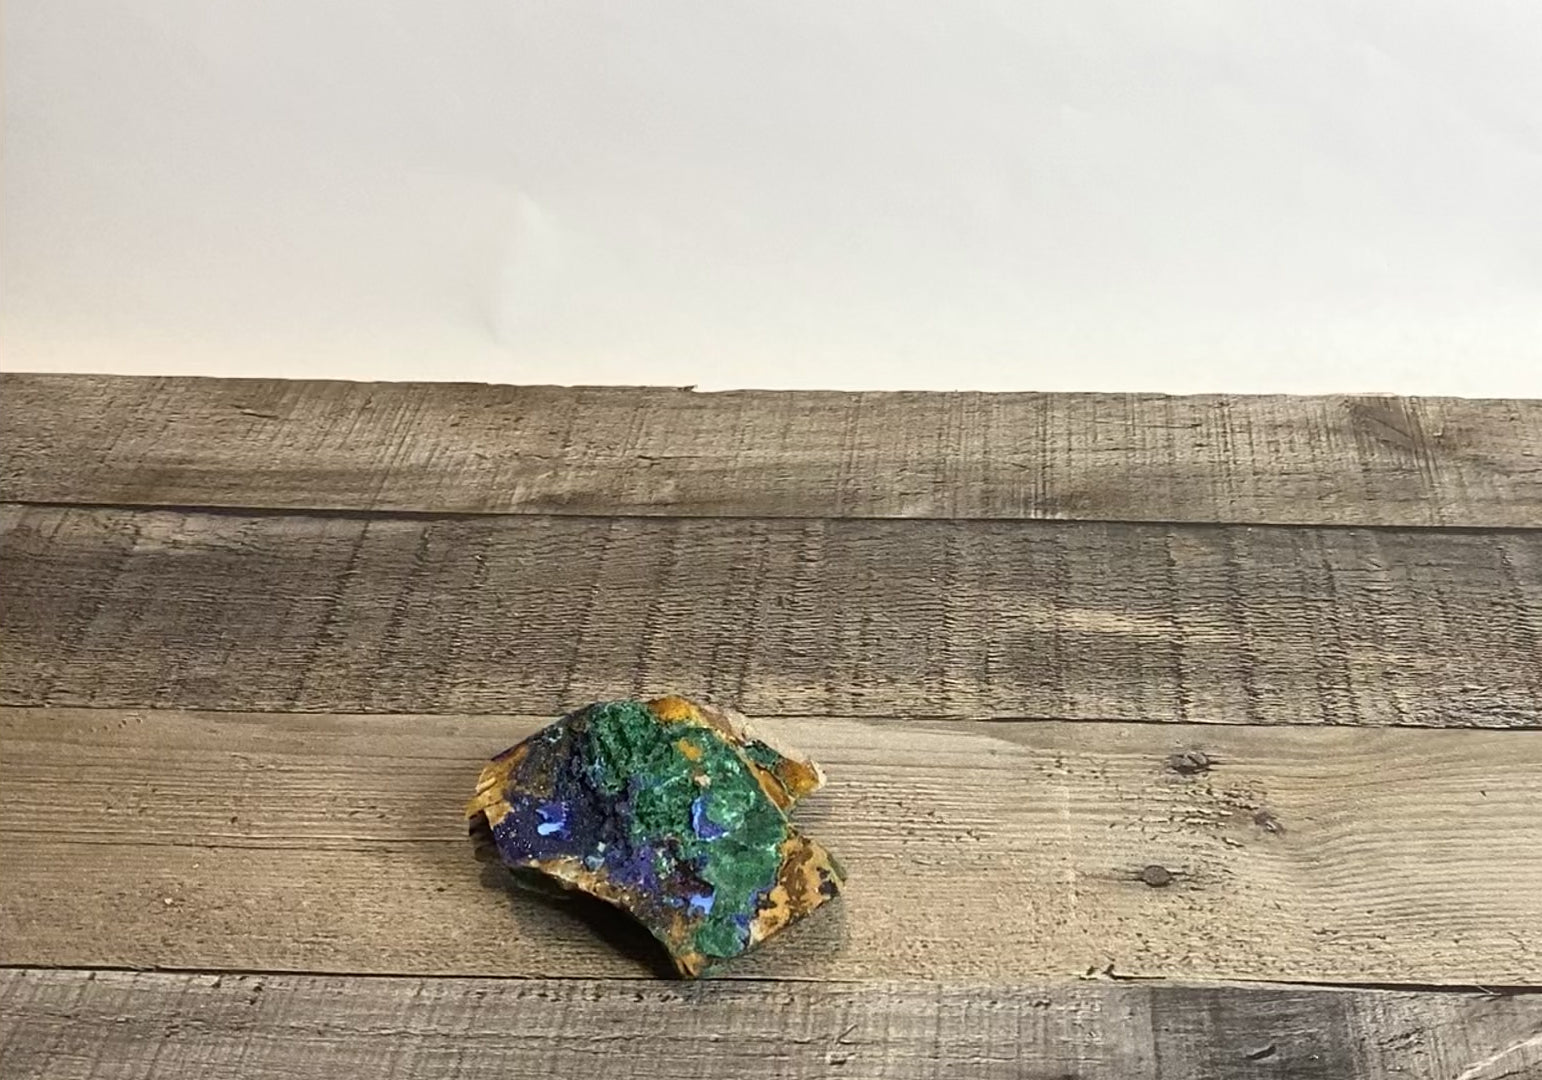 3.2" long Sparkly Azurite with Fibrous Malachite - Video